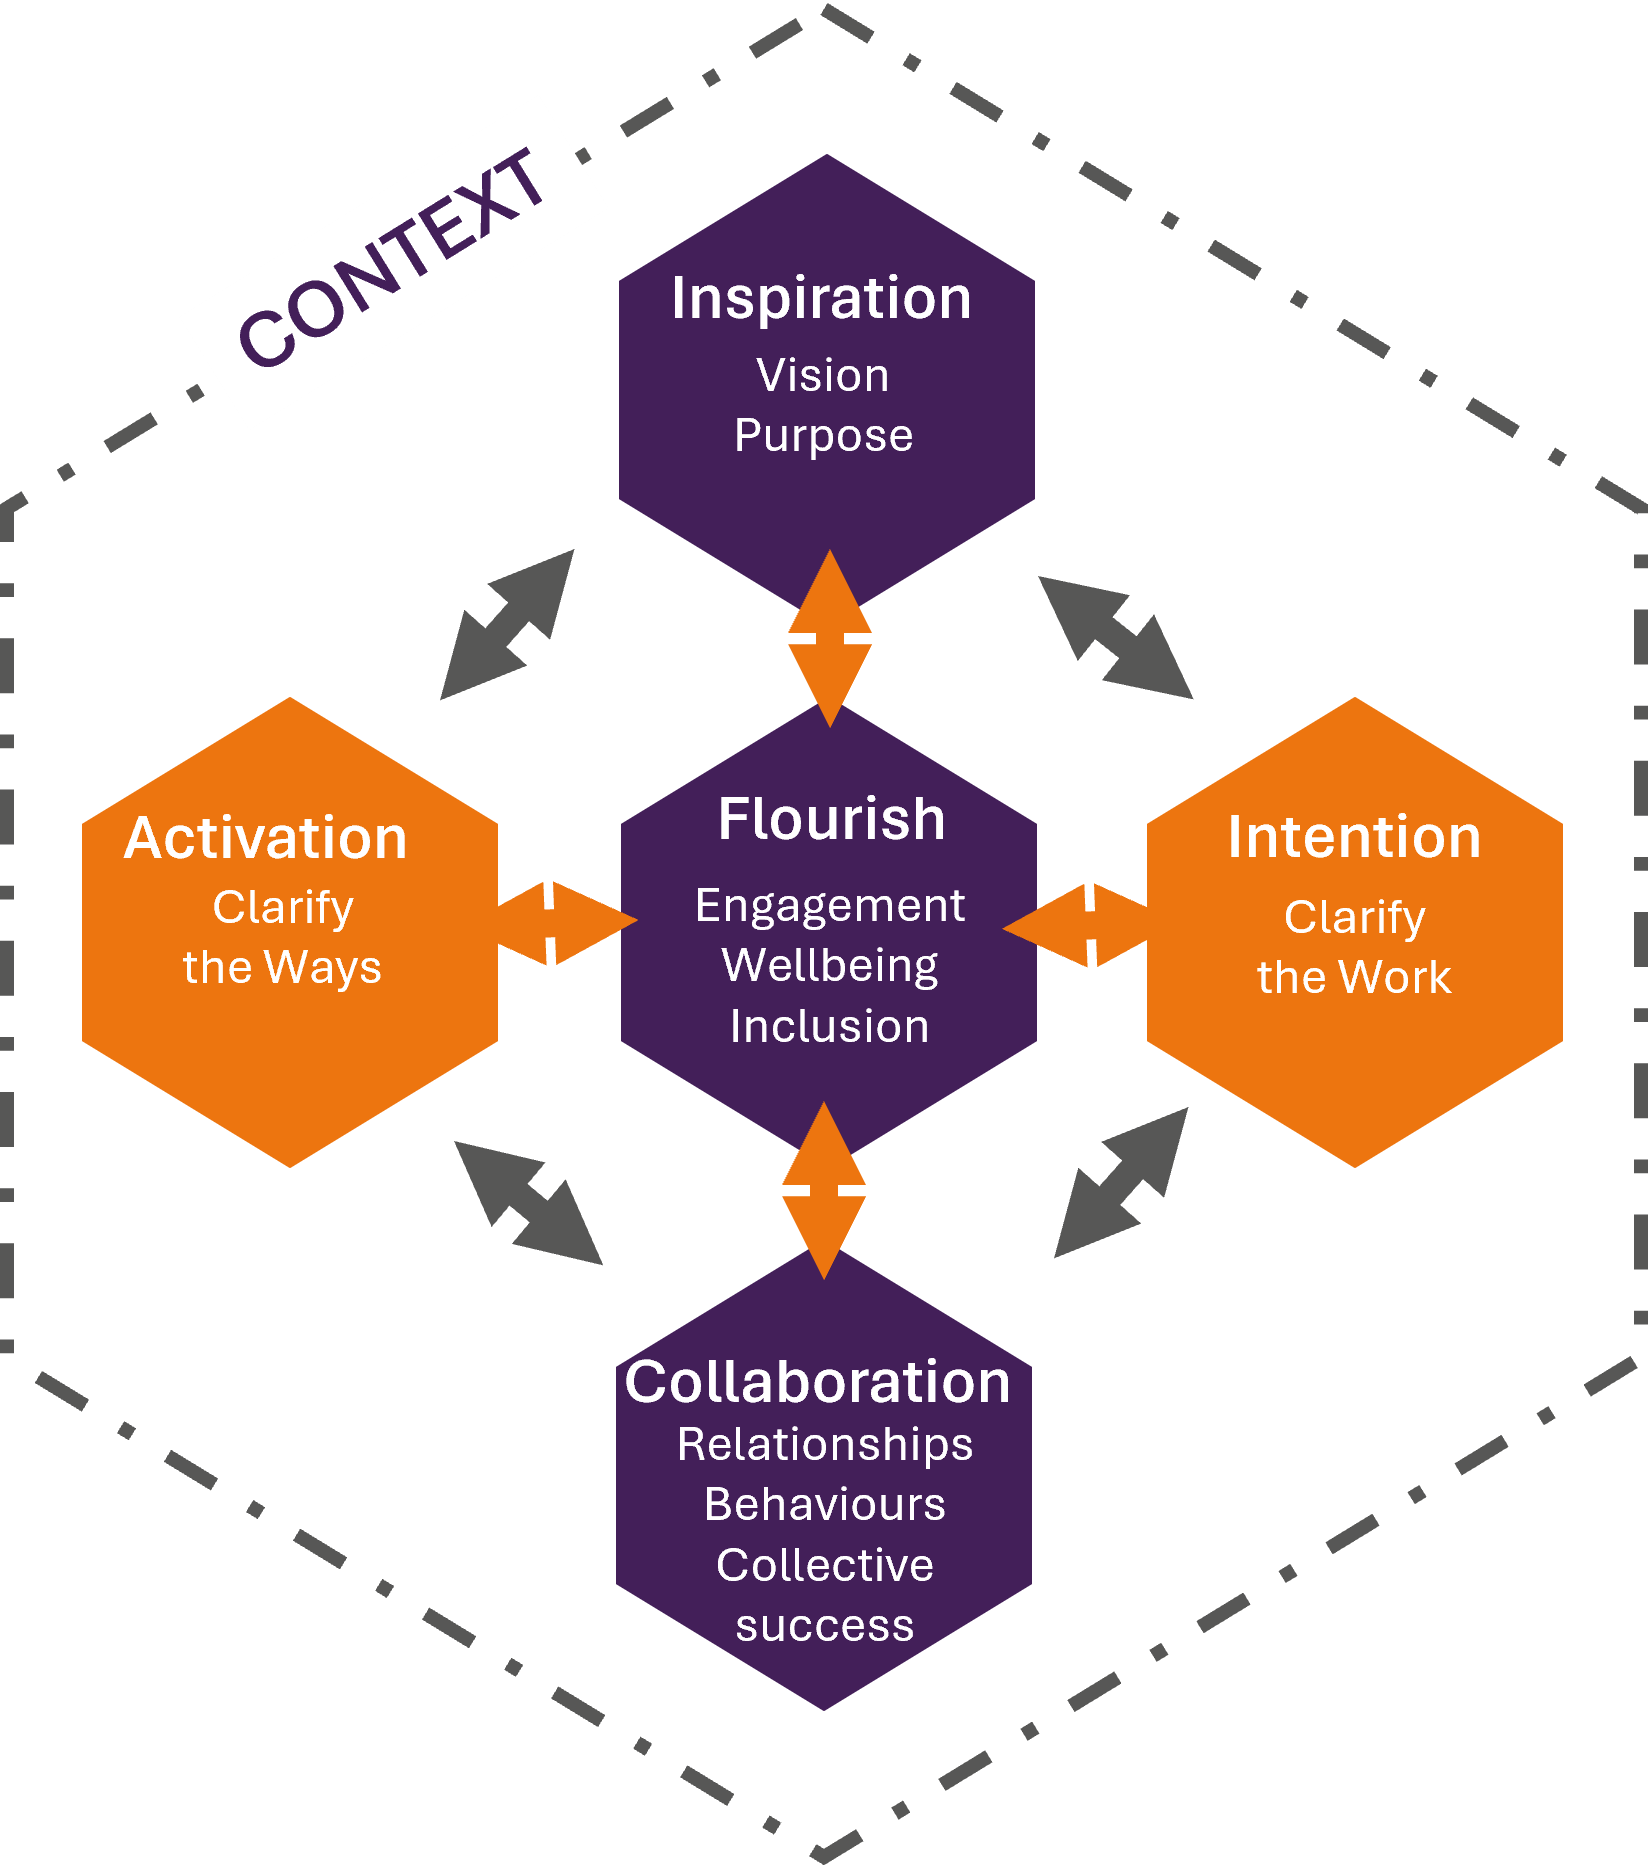 A diagram detailing the 5 aspects of the Beehive Framework: Inspiration, Activation, Intention, Collaboration and Flourish.